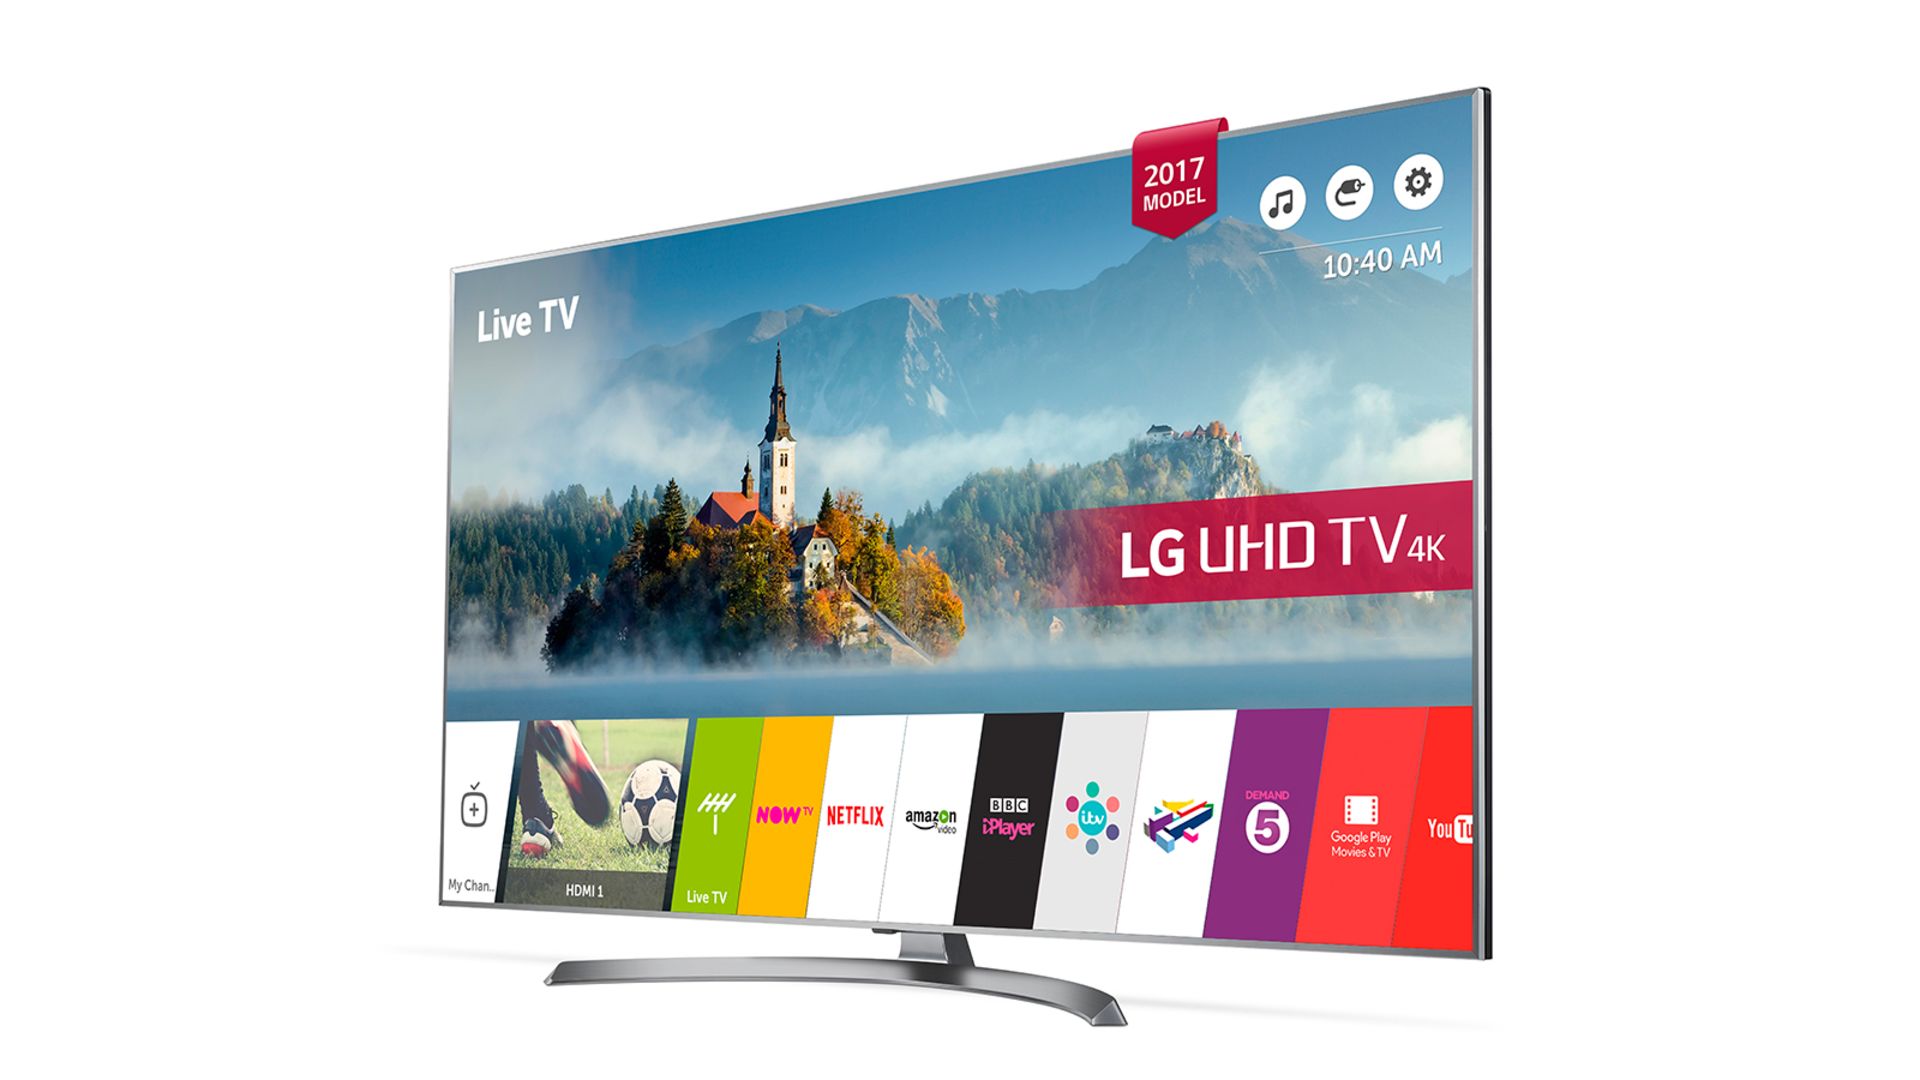 + VAT Grade A LG 55 Inch ACTIVE HDR 4K ULTRA HD LED SMART TV WITH FREEVIEW HD & WEBOS & WIFI